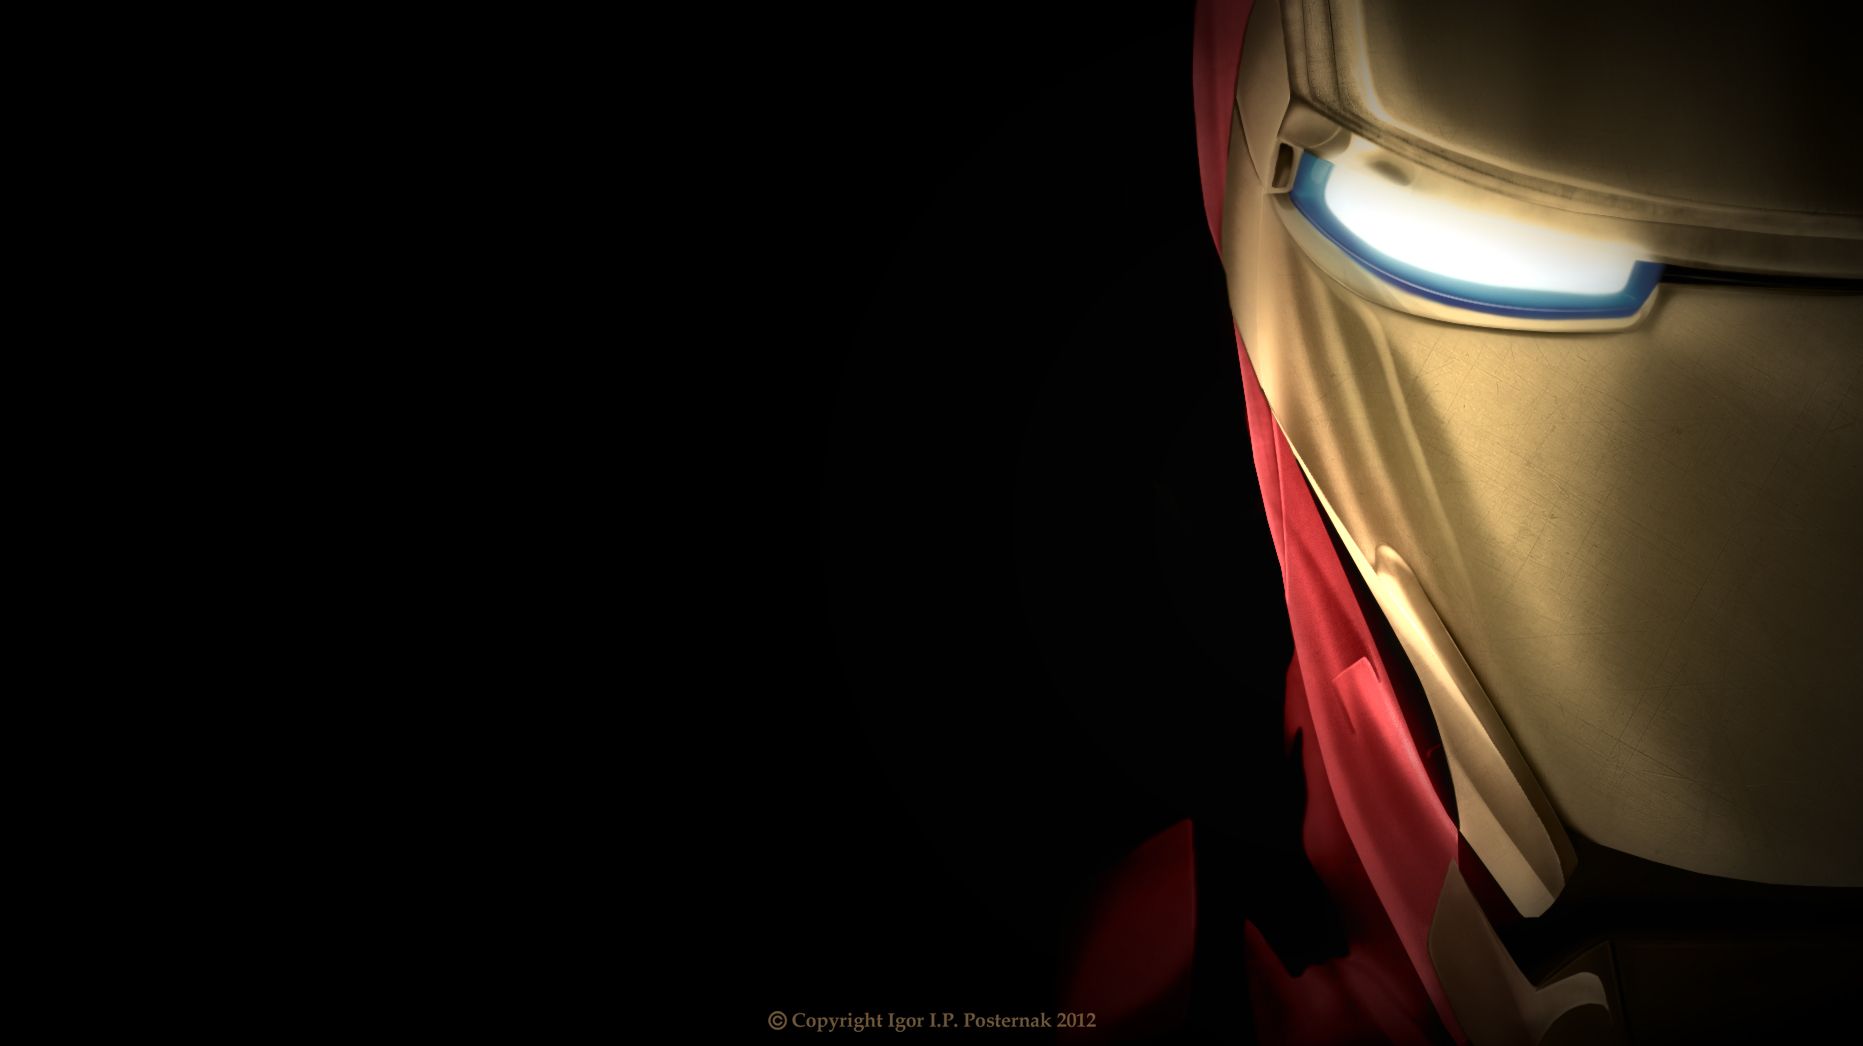 Gallery for - awesome ironman backgrounds